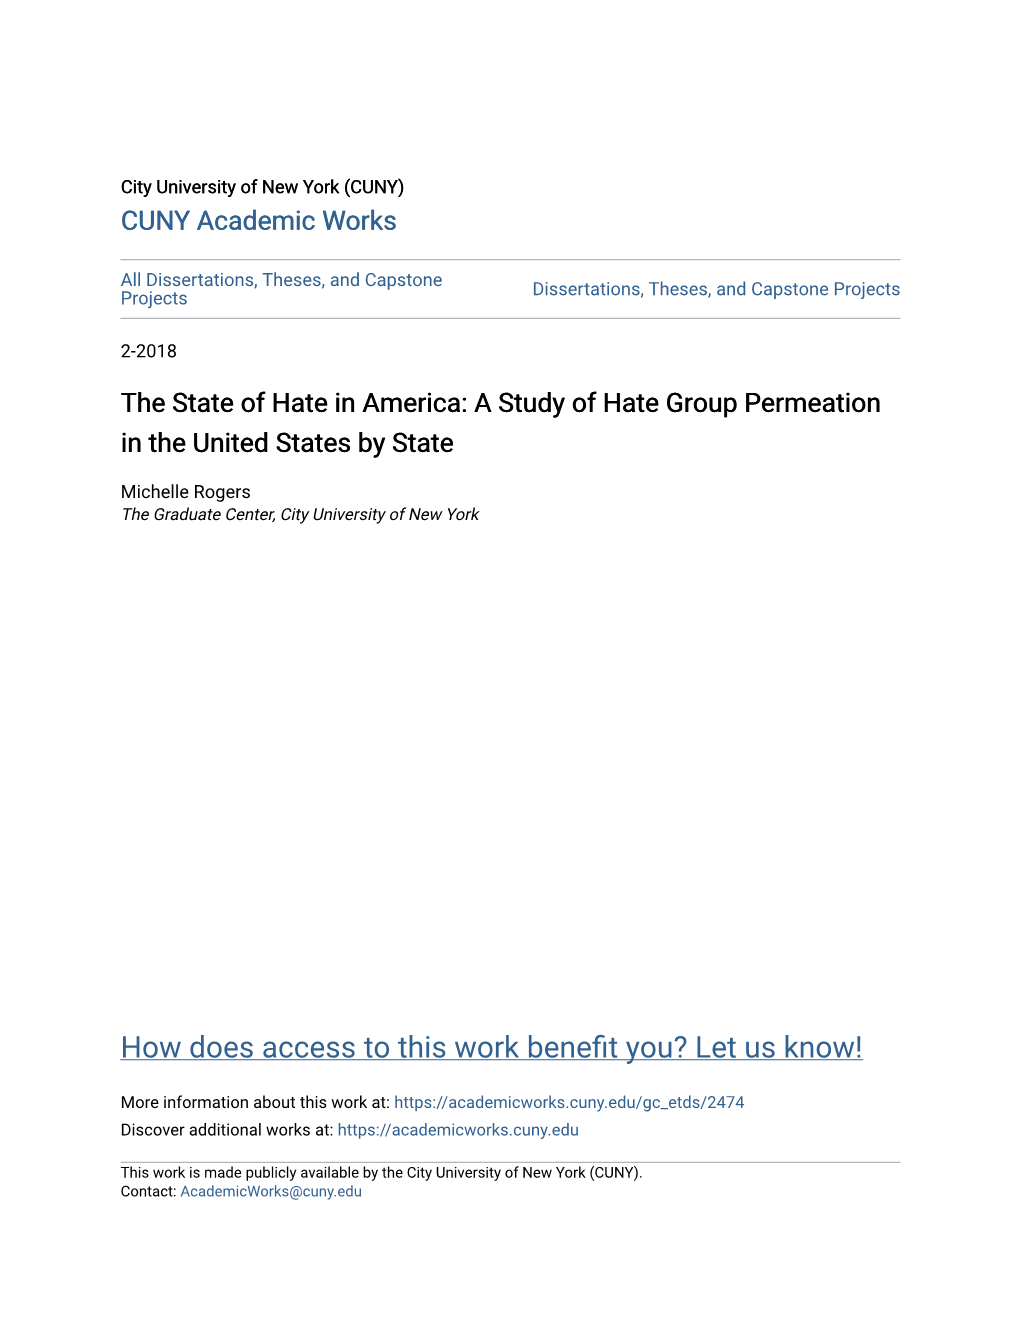 A Study of Hate Group Permeation in the United States by State